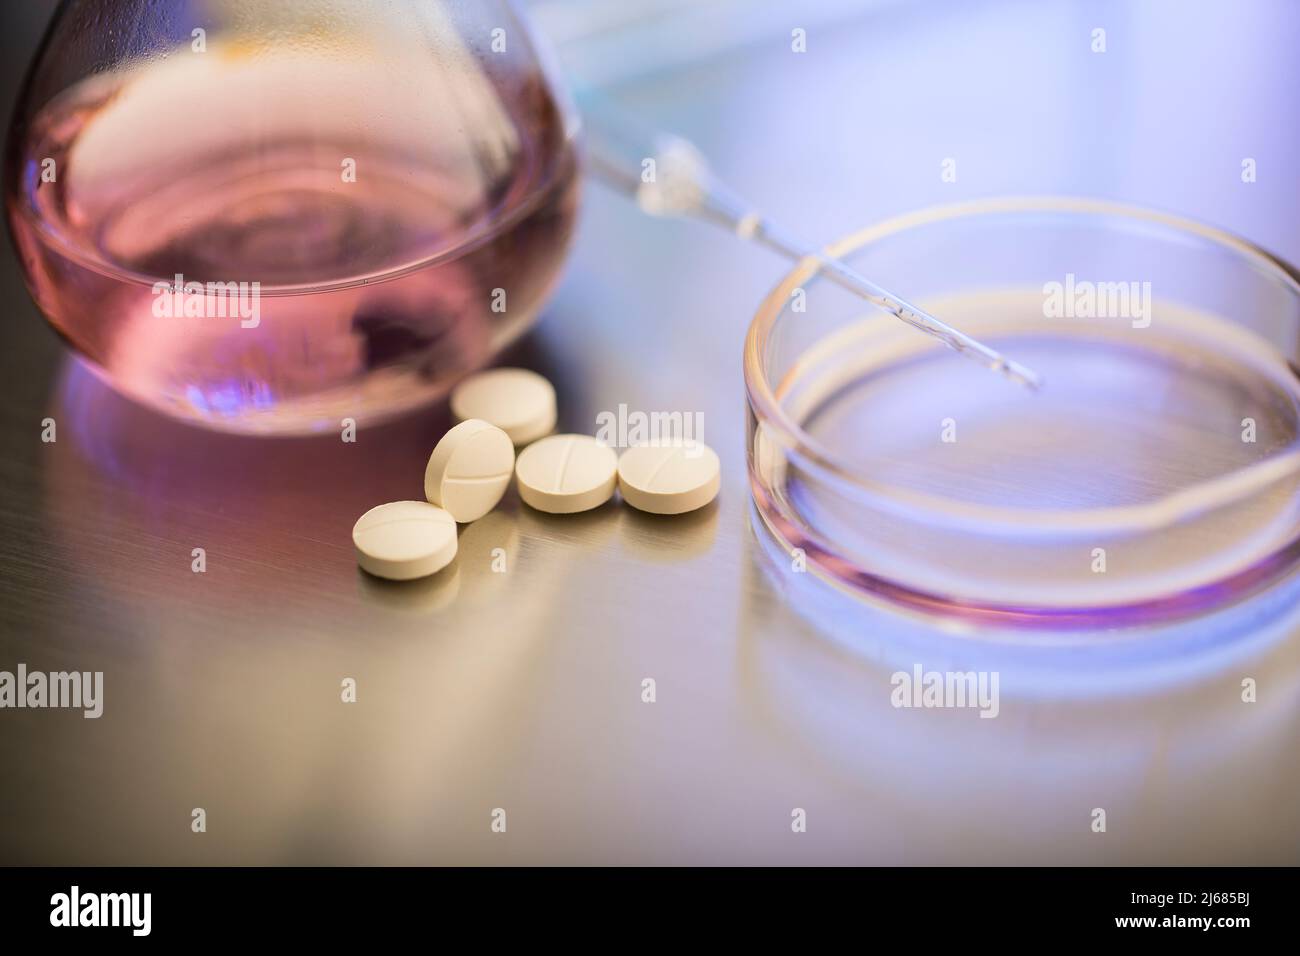 Pale yellow pills from the lab with dropper, petri dish and laboratory flask - stock photo Stock Photo